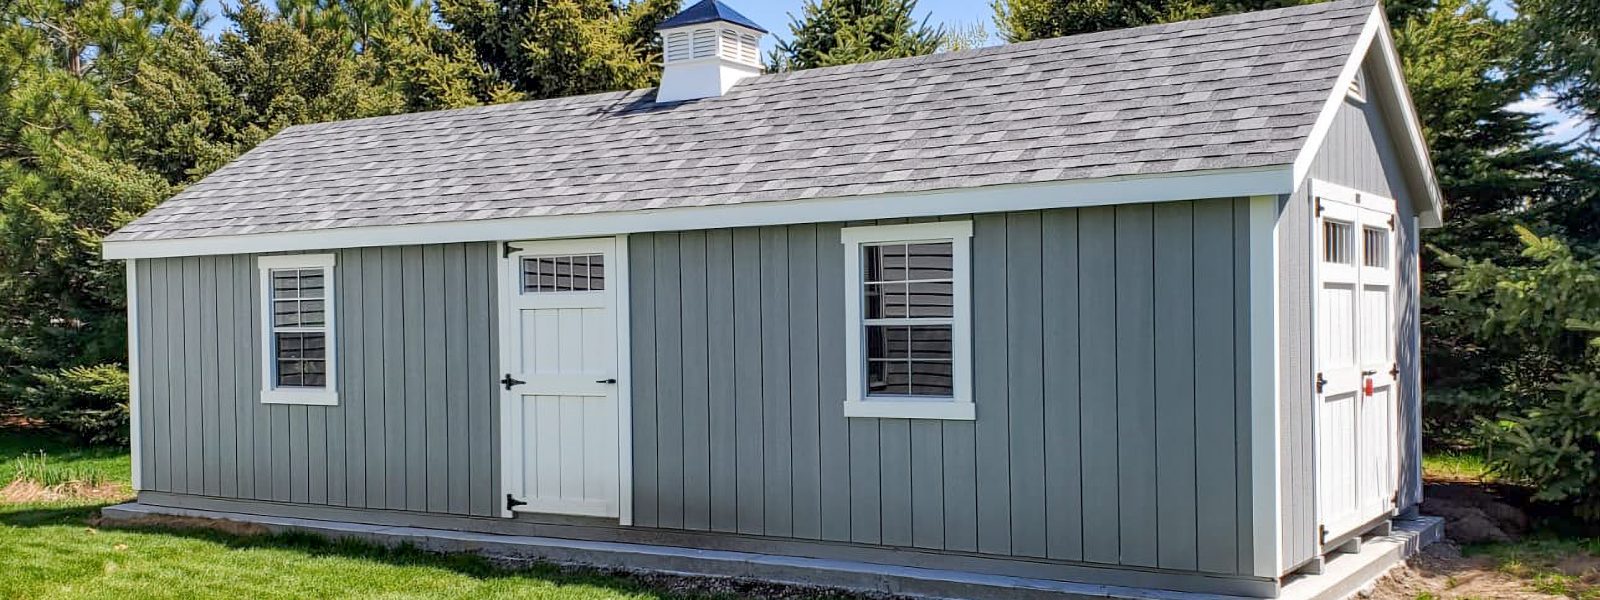 prefab storage shed for sale in saint paul mn